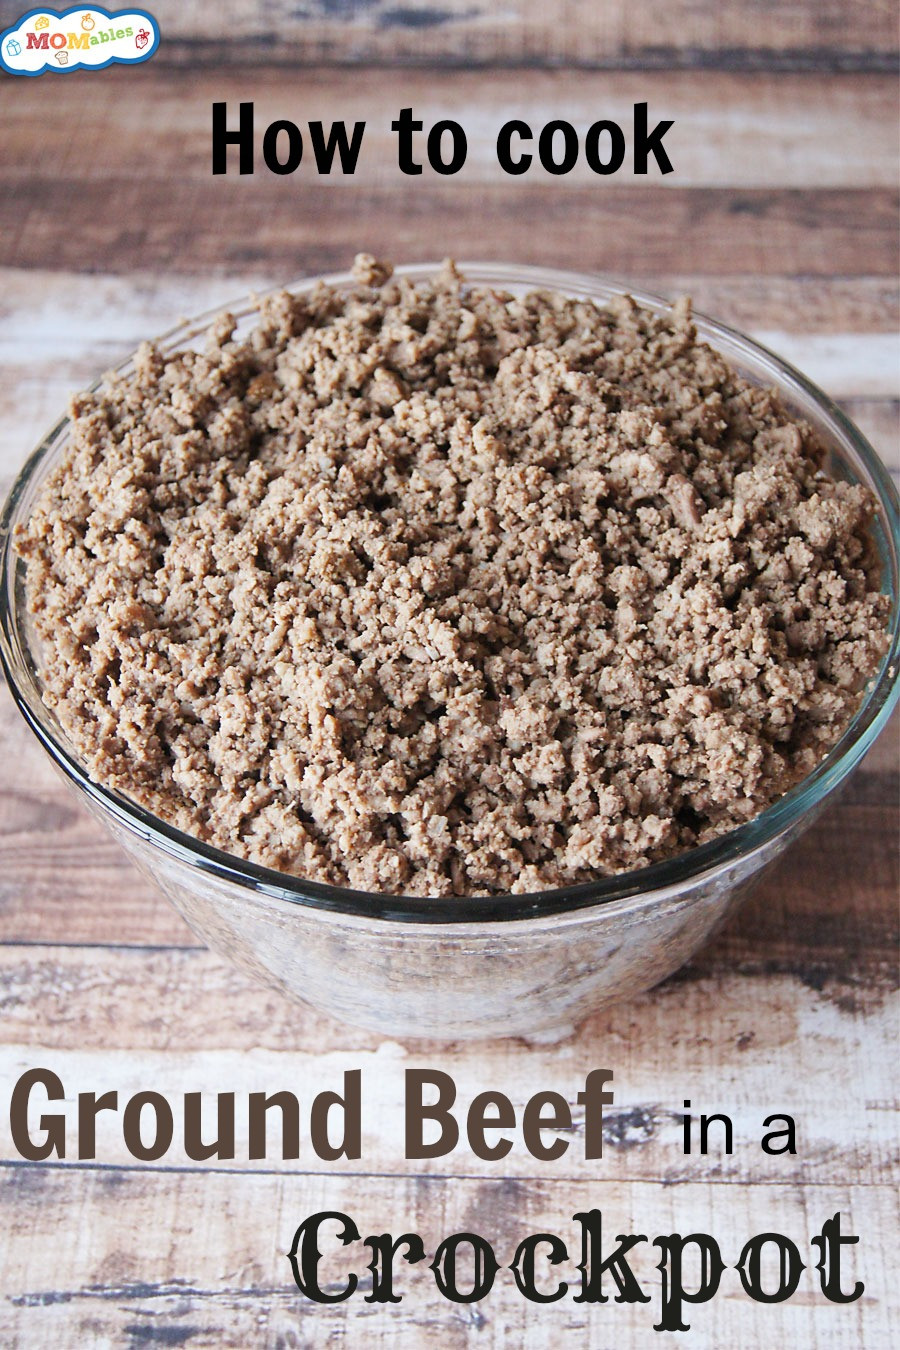 What To Cook With Ground Beef
 How to Cook Ground Beef in a Crockpot